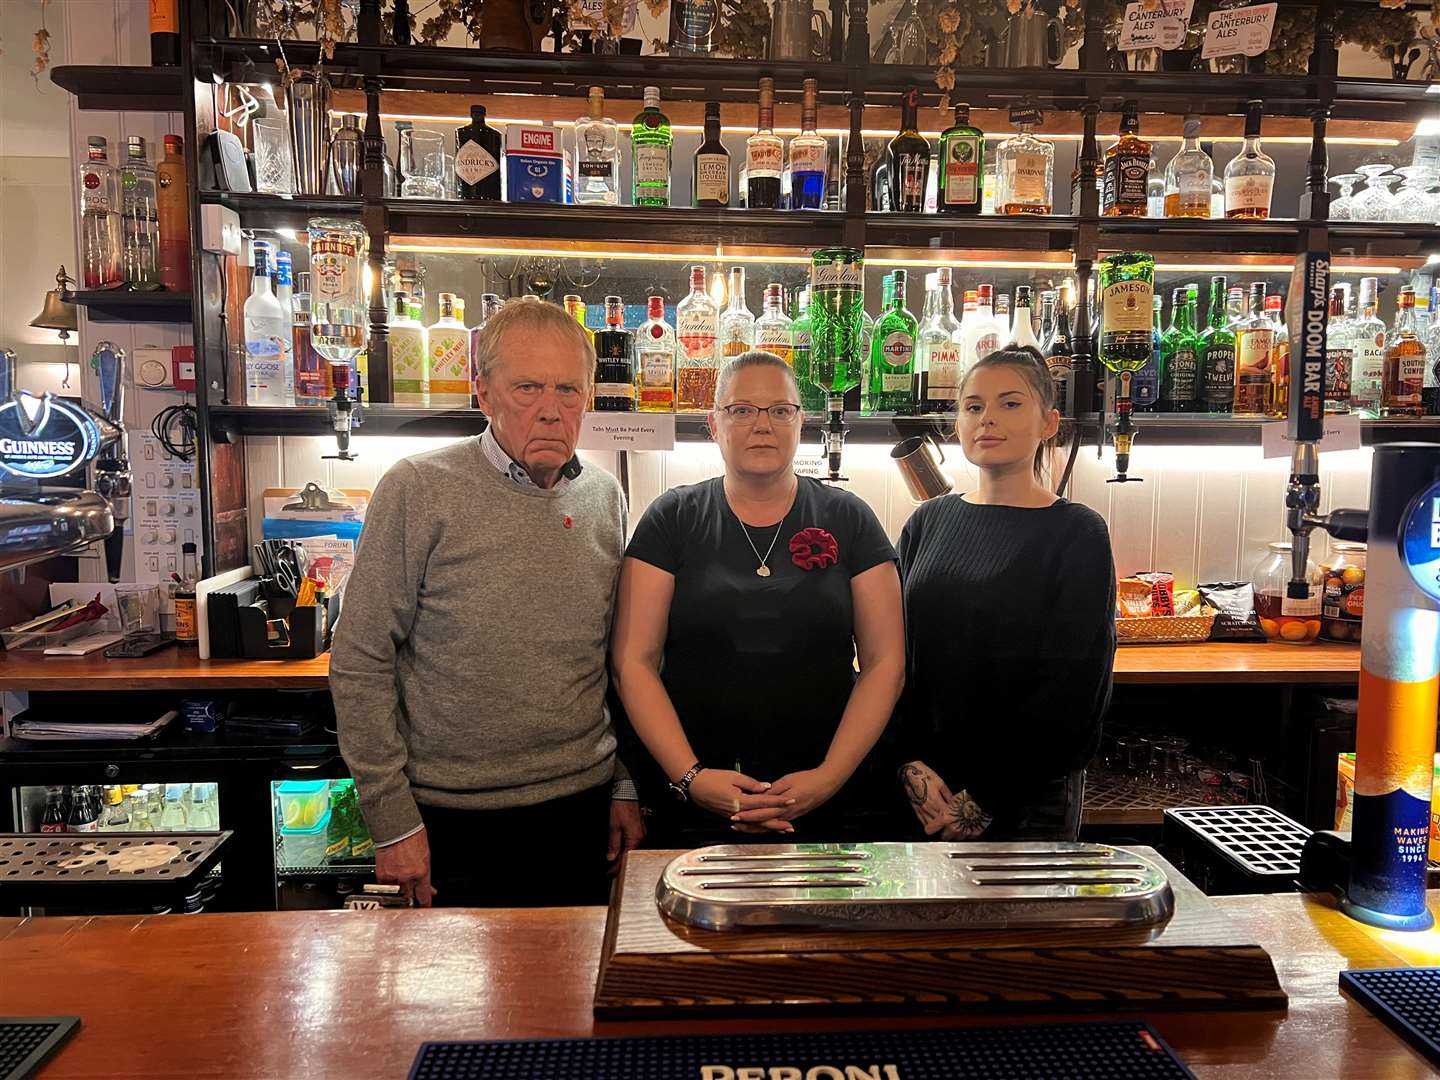 Chris Porter, 76, with The Harrow manager, Sarah Reeves, 40, and barmaid Mia Hayes, 25. Picture: Megan Carr